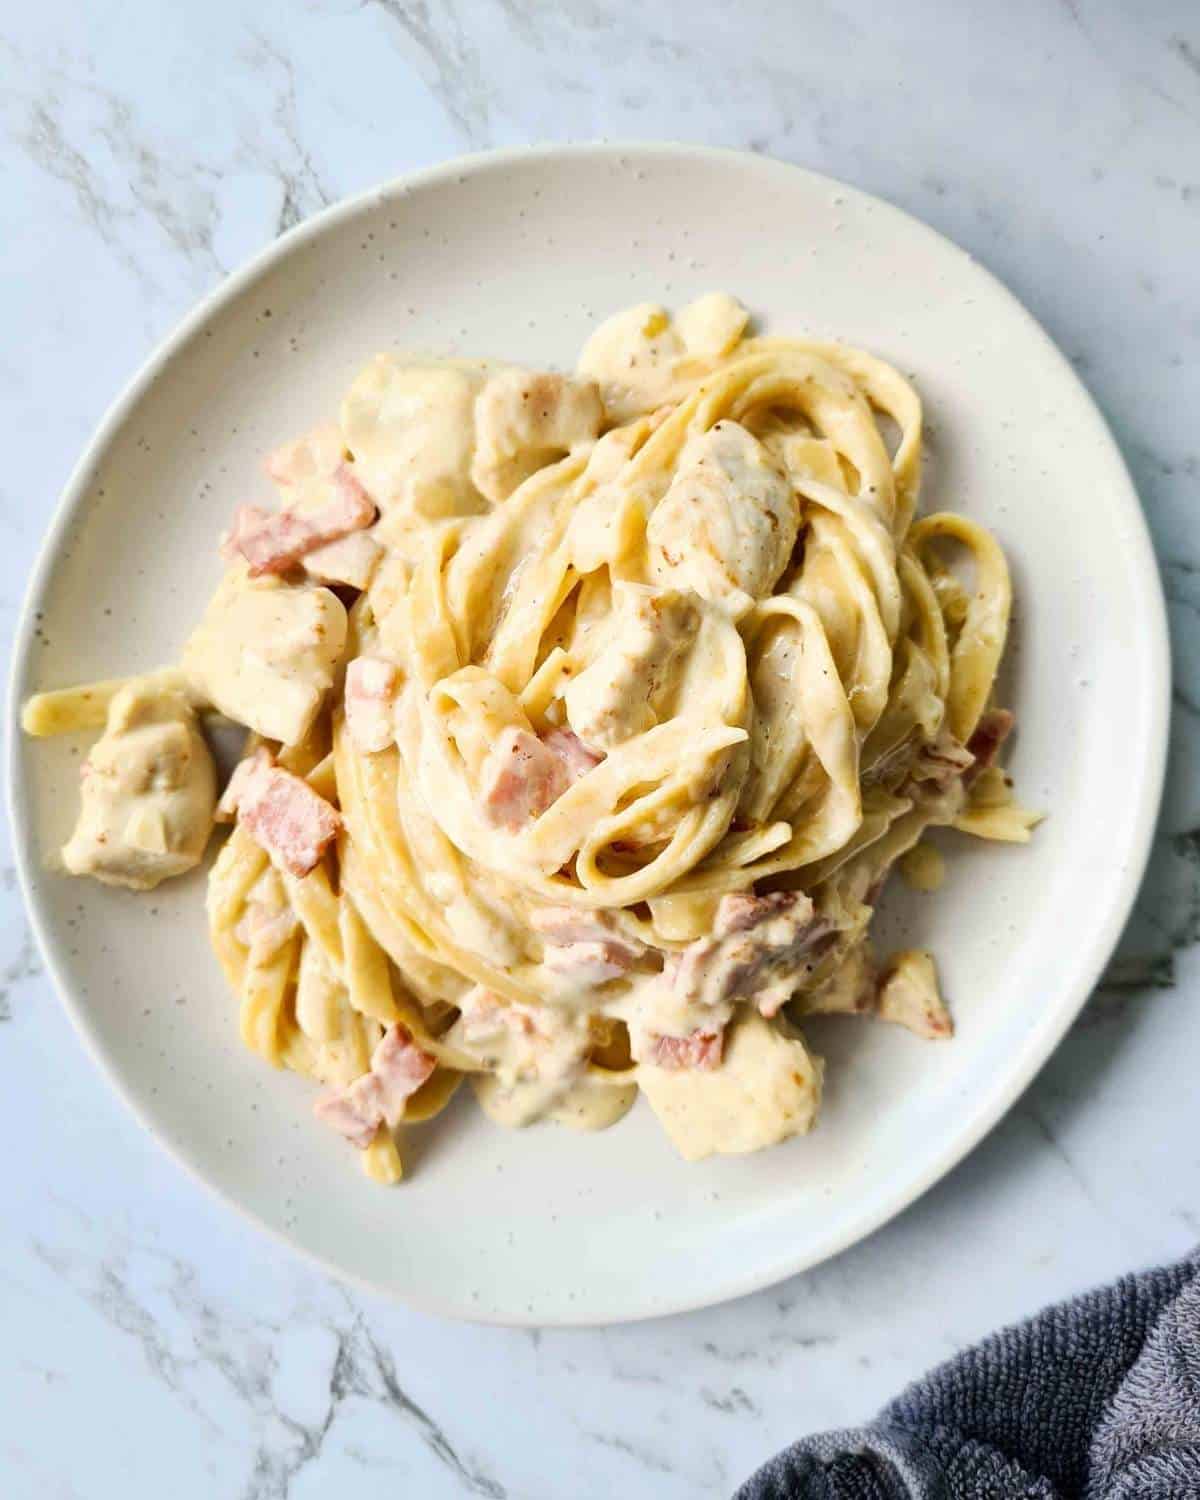 Creamy pasta with chicken and bacon pieces on a white plate